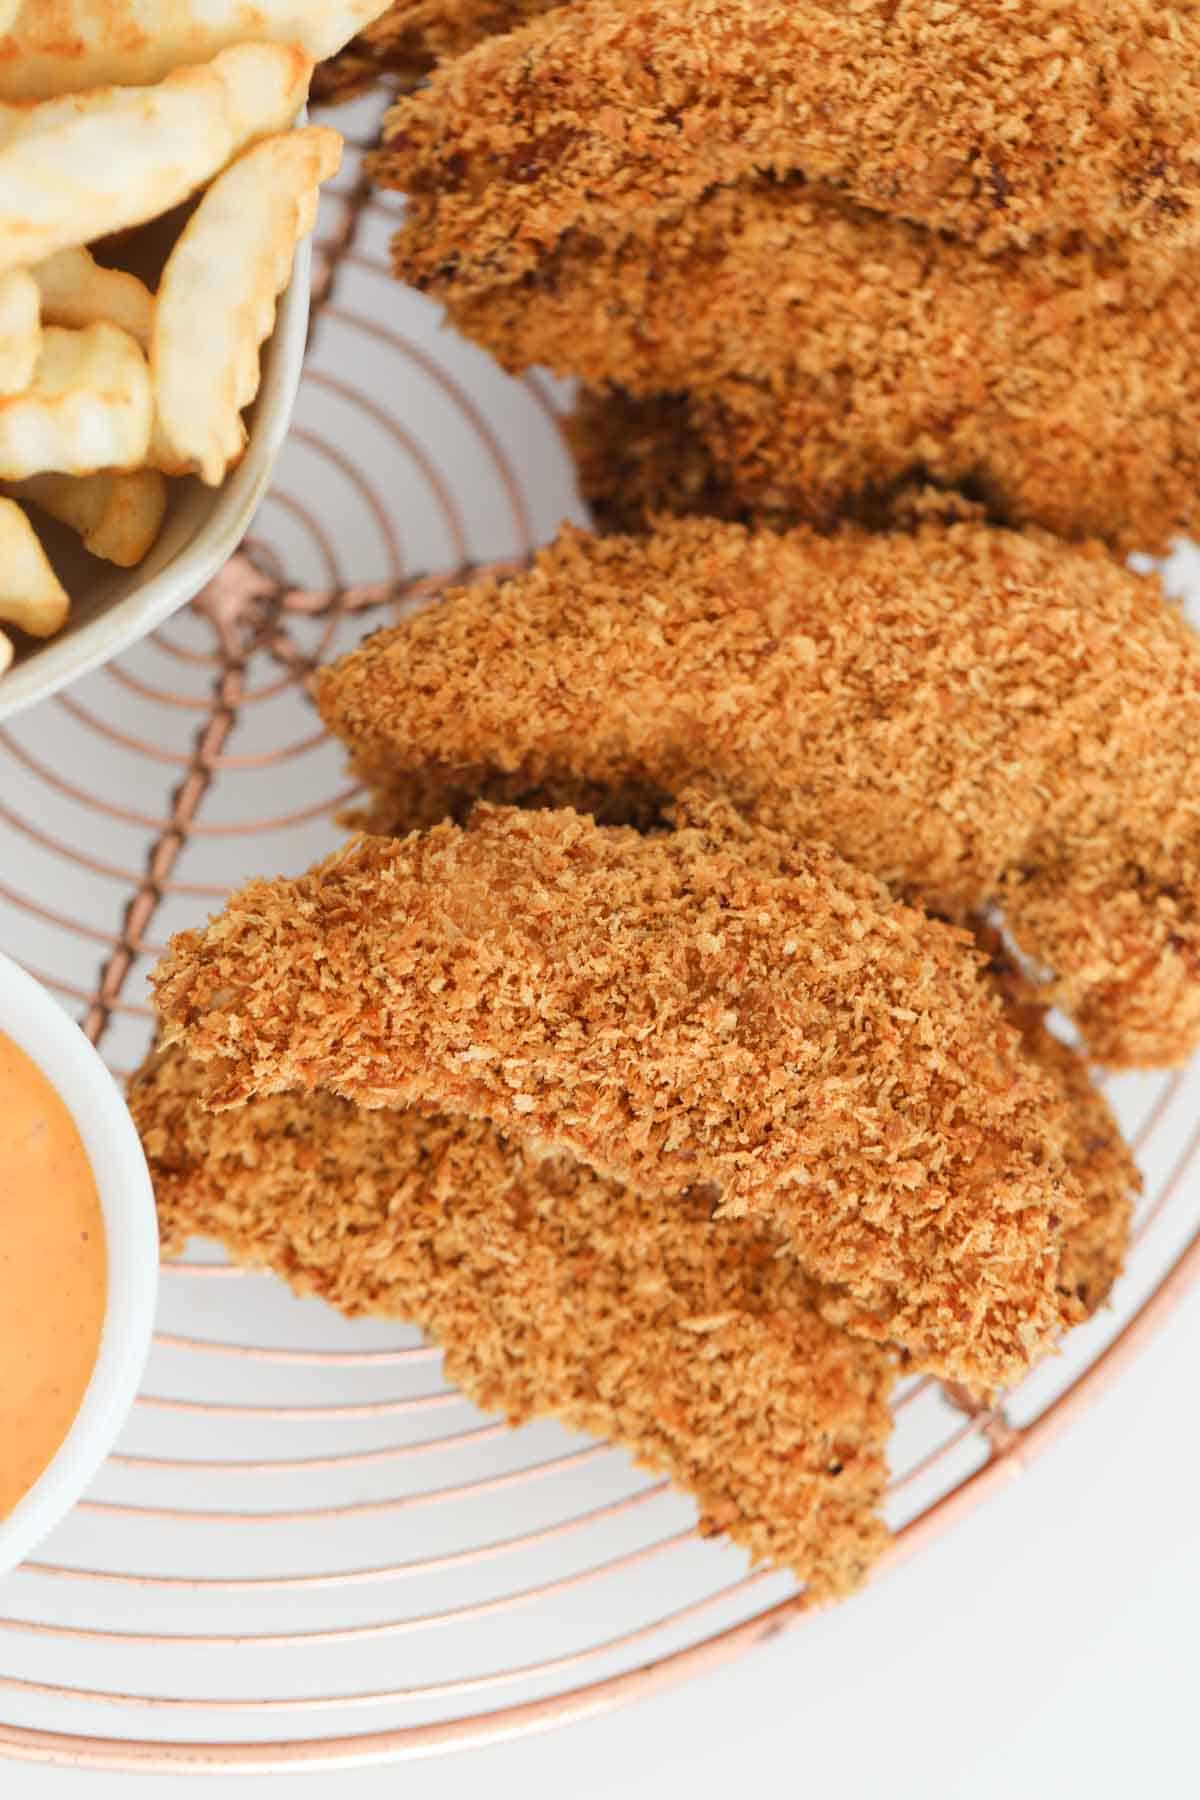 Crispy crunchy baked strips on chicken on a wire rack with a small bowl of dipping sauce.